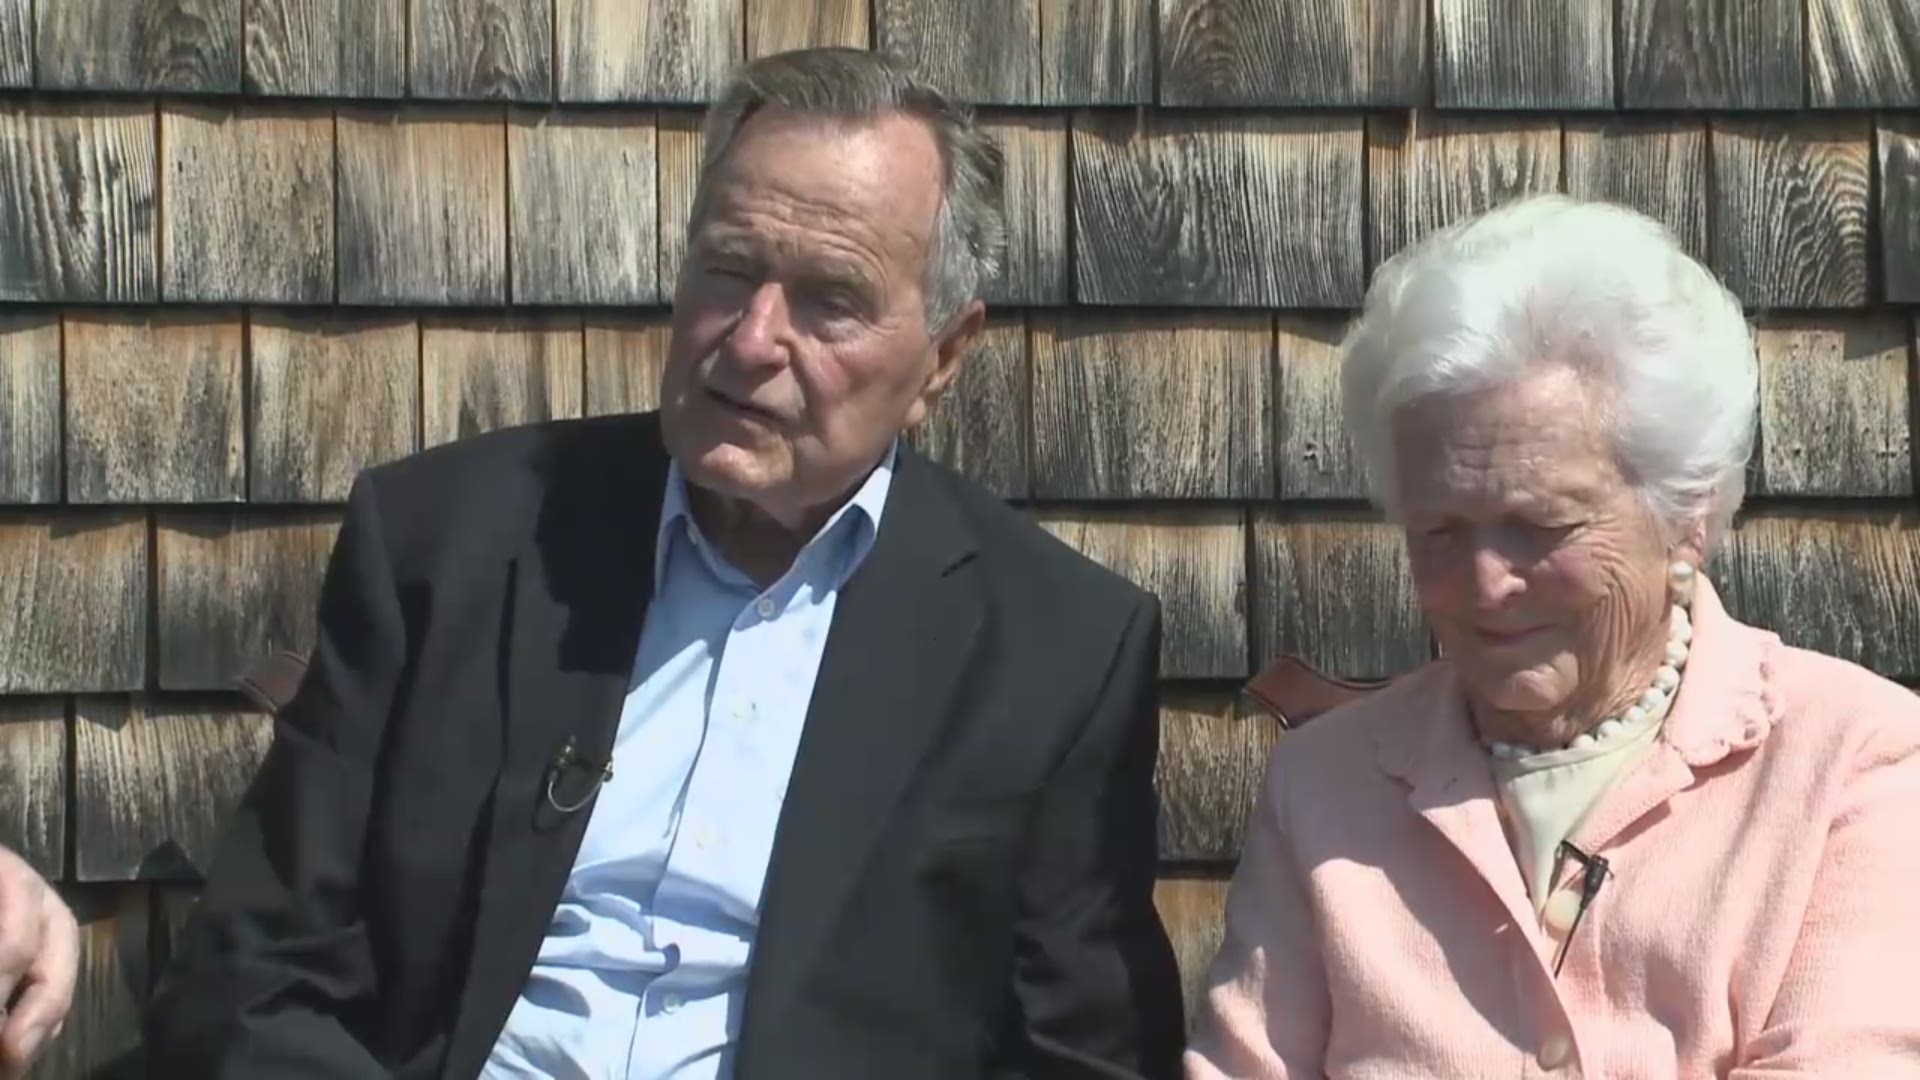 RAW interview with George and Barbara Bush